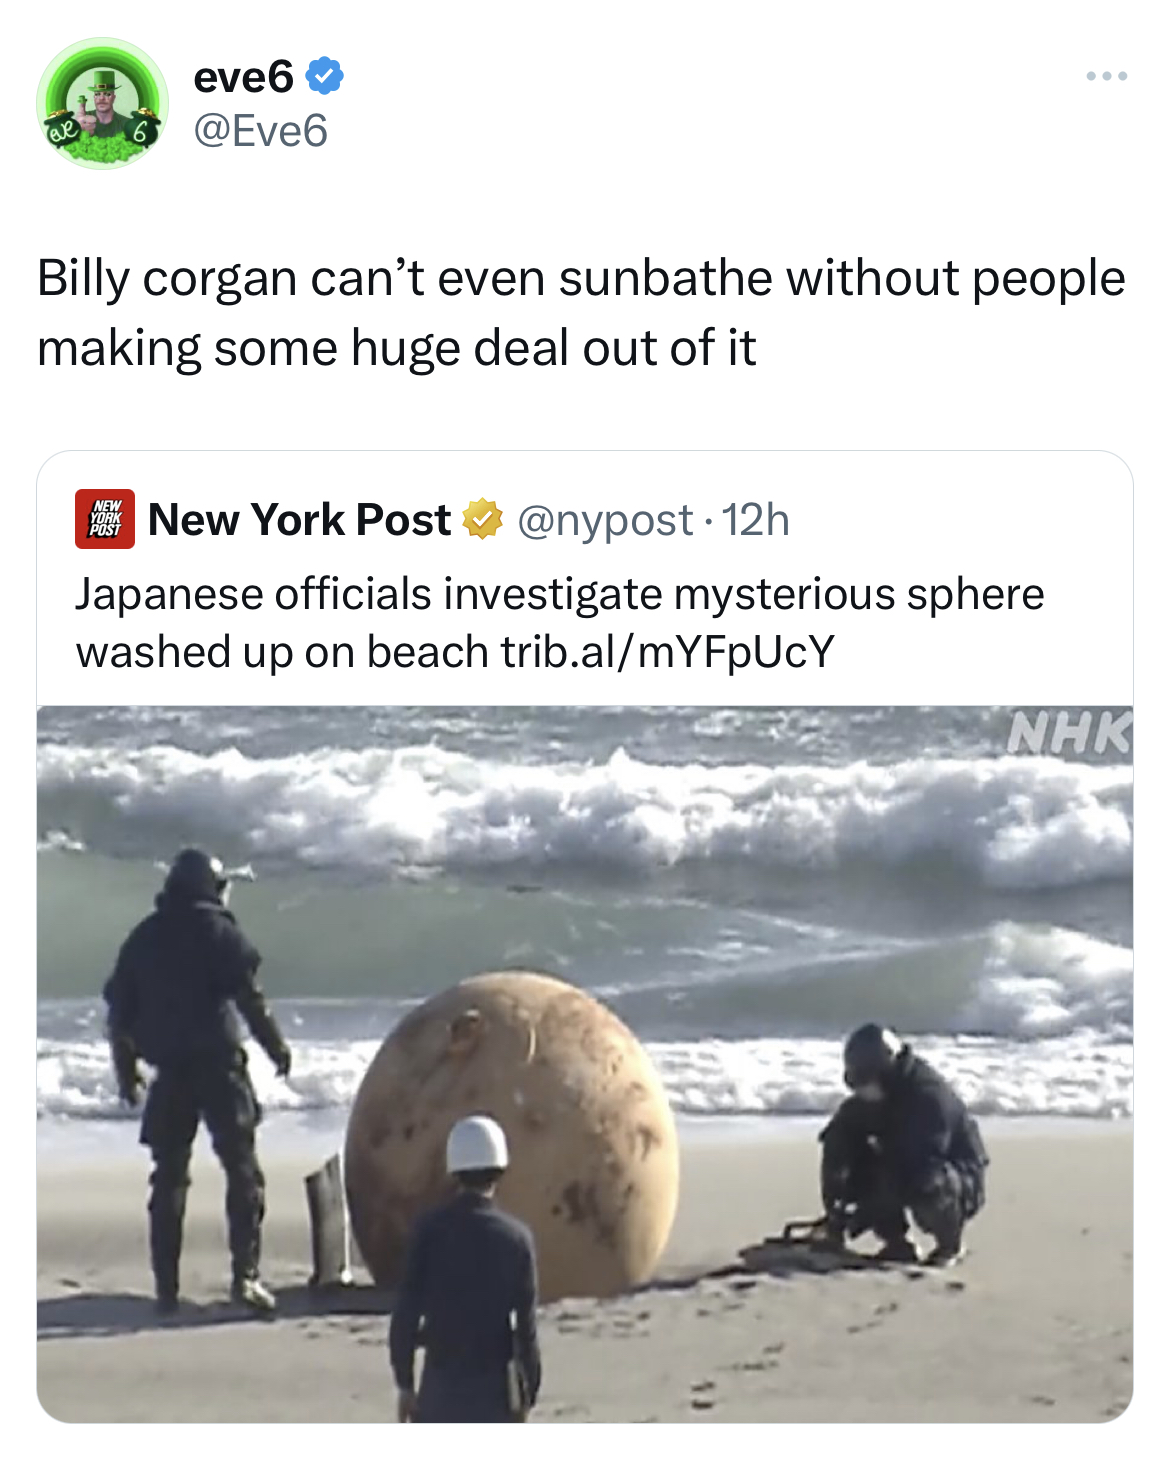 Tweets dunking on celebs - Bomb - eve6 Billy corgan can't even sunbathe without people making some huge deal out of it New York Post Japanese officials investigate mysterious sphere washed up on beach trib.almYFpUcY Nhk